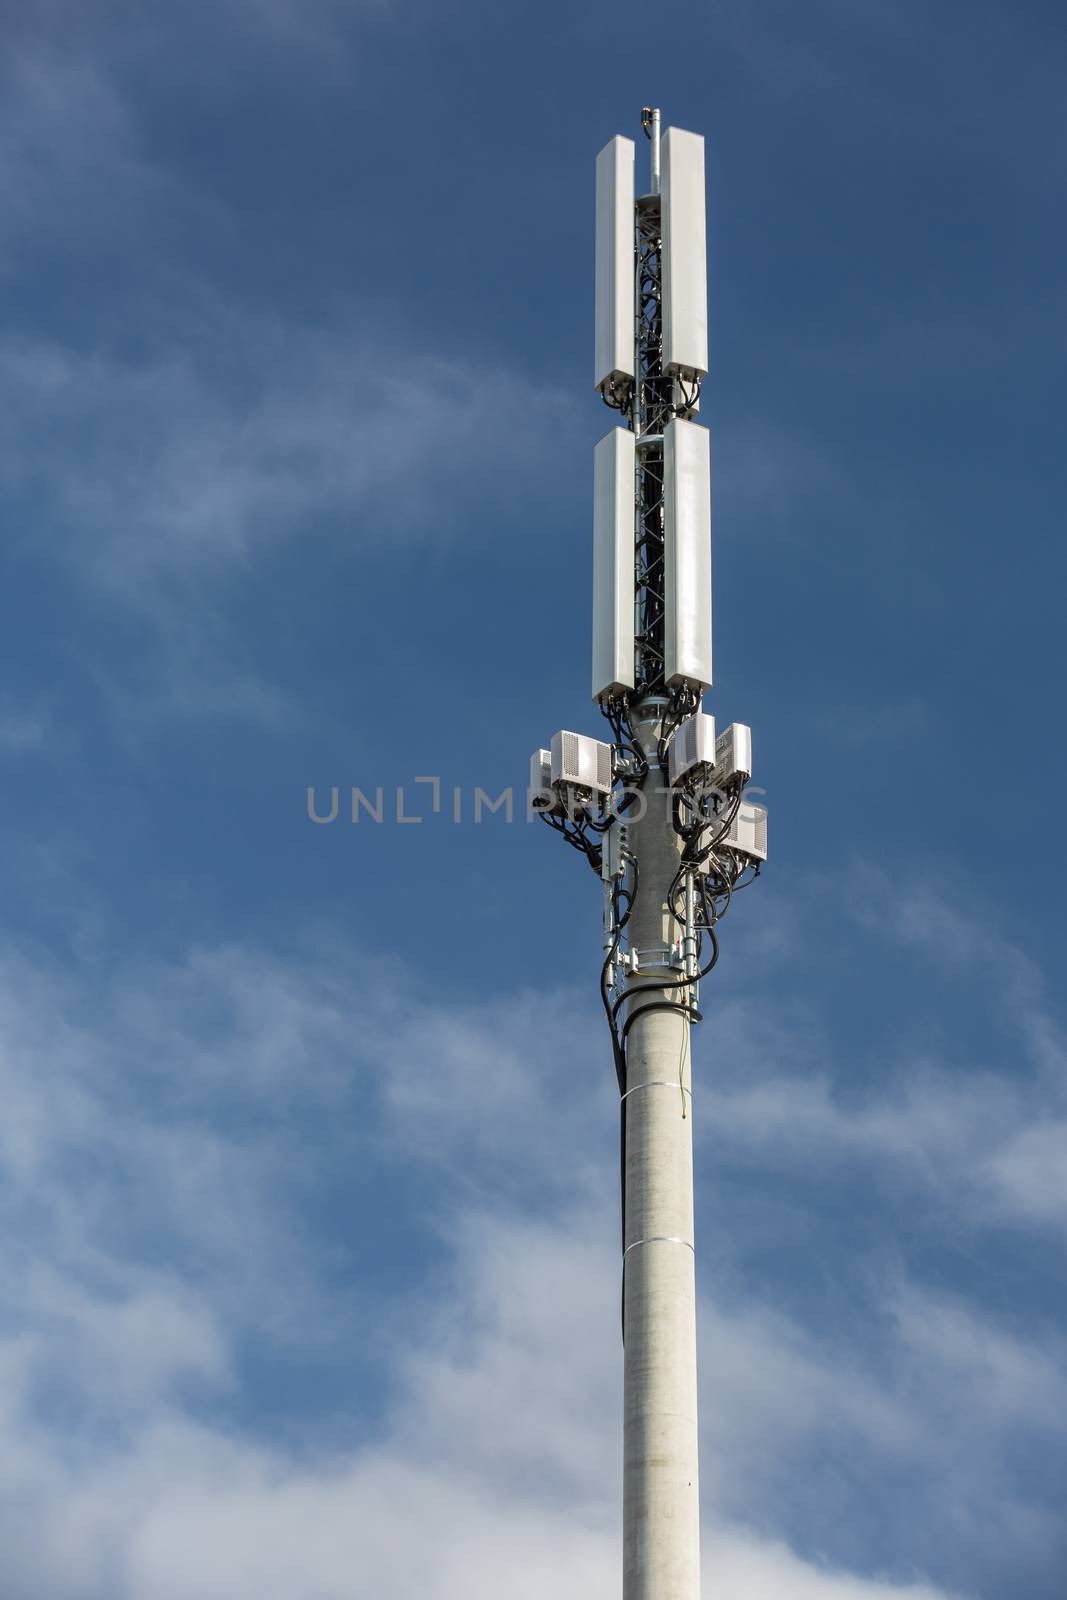 Cell phone tower against a partly cloudy sky.